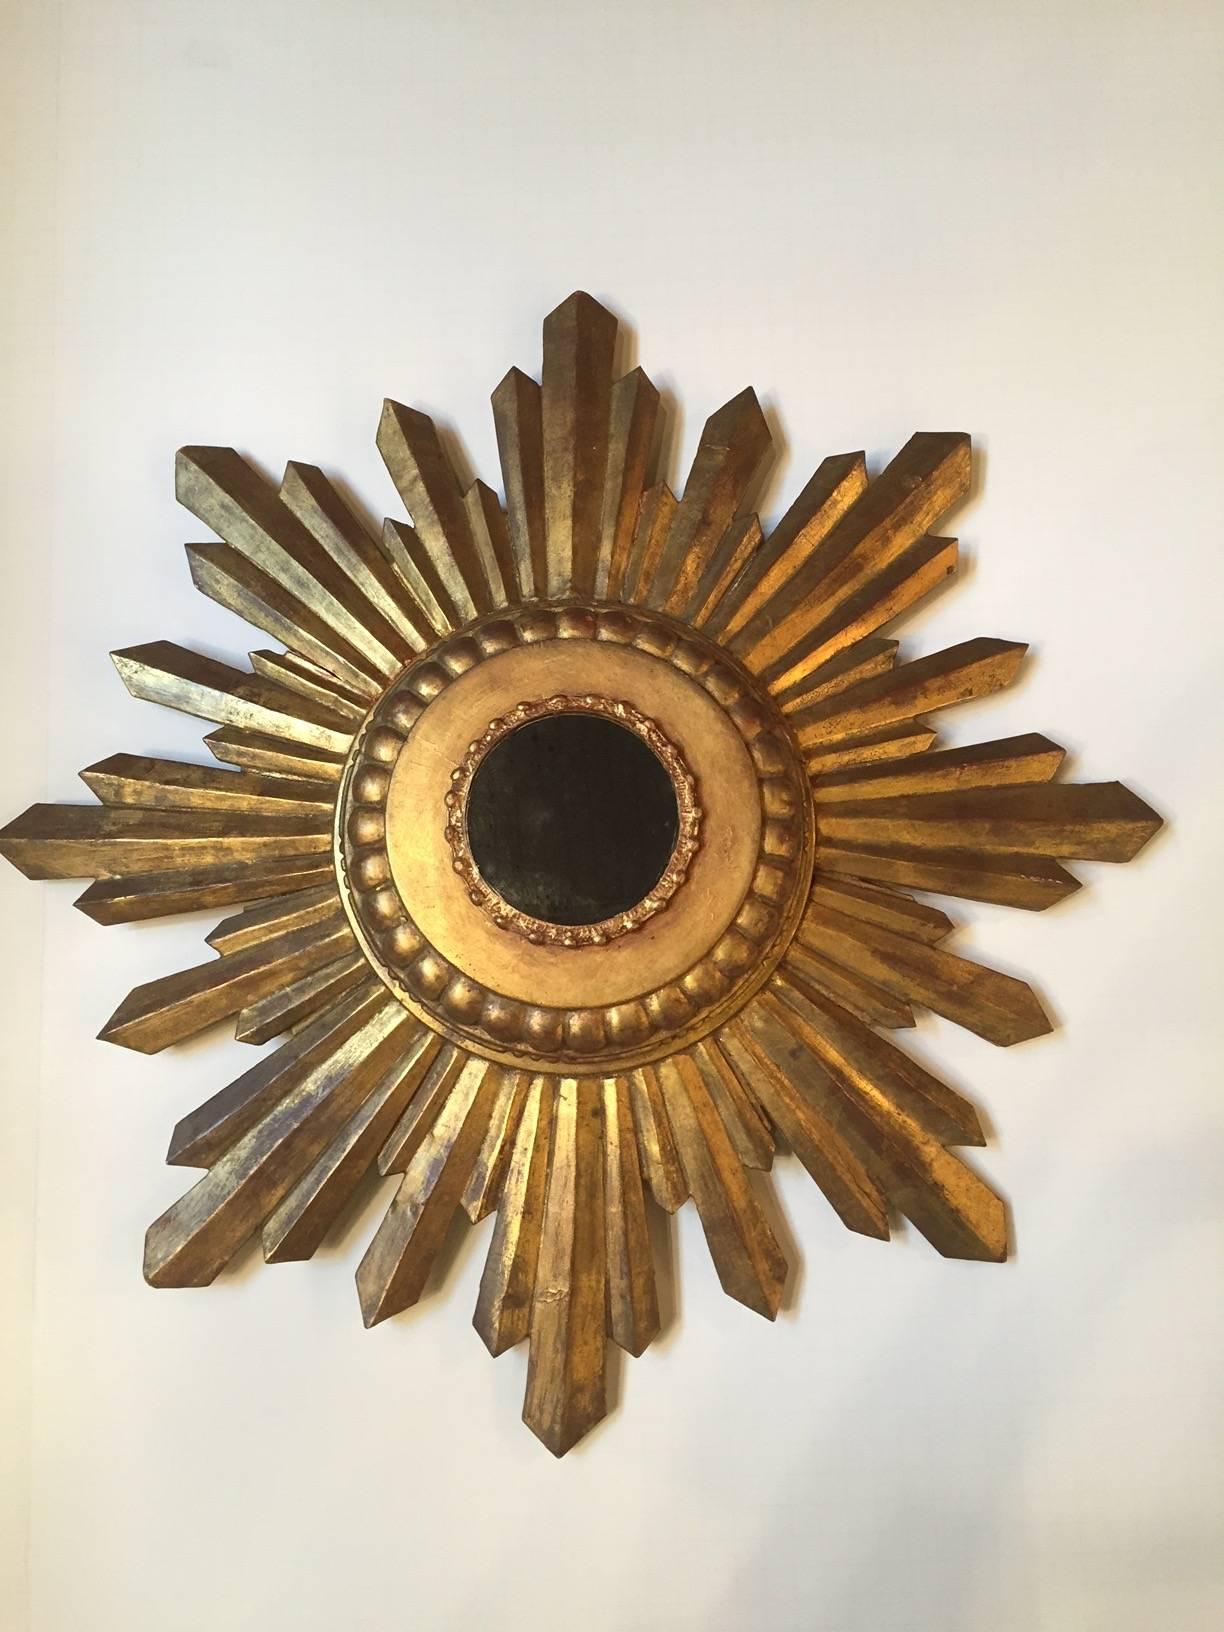 Wonderful gem of a starburst mirror in real giltwood with round aged mirror and 